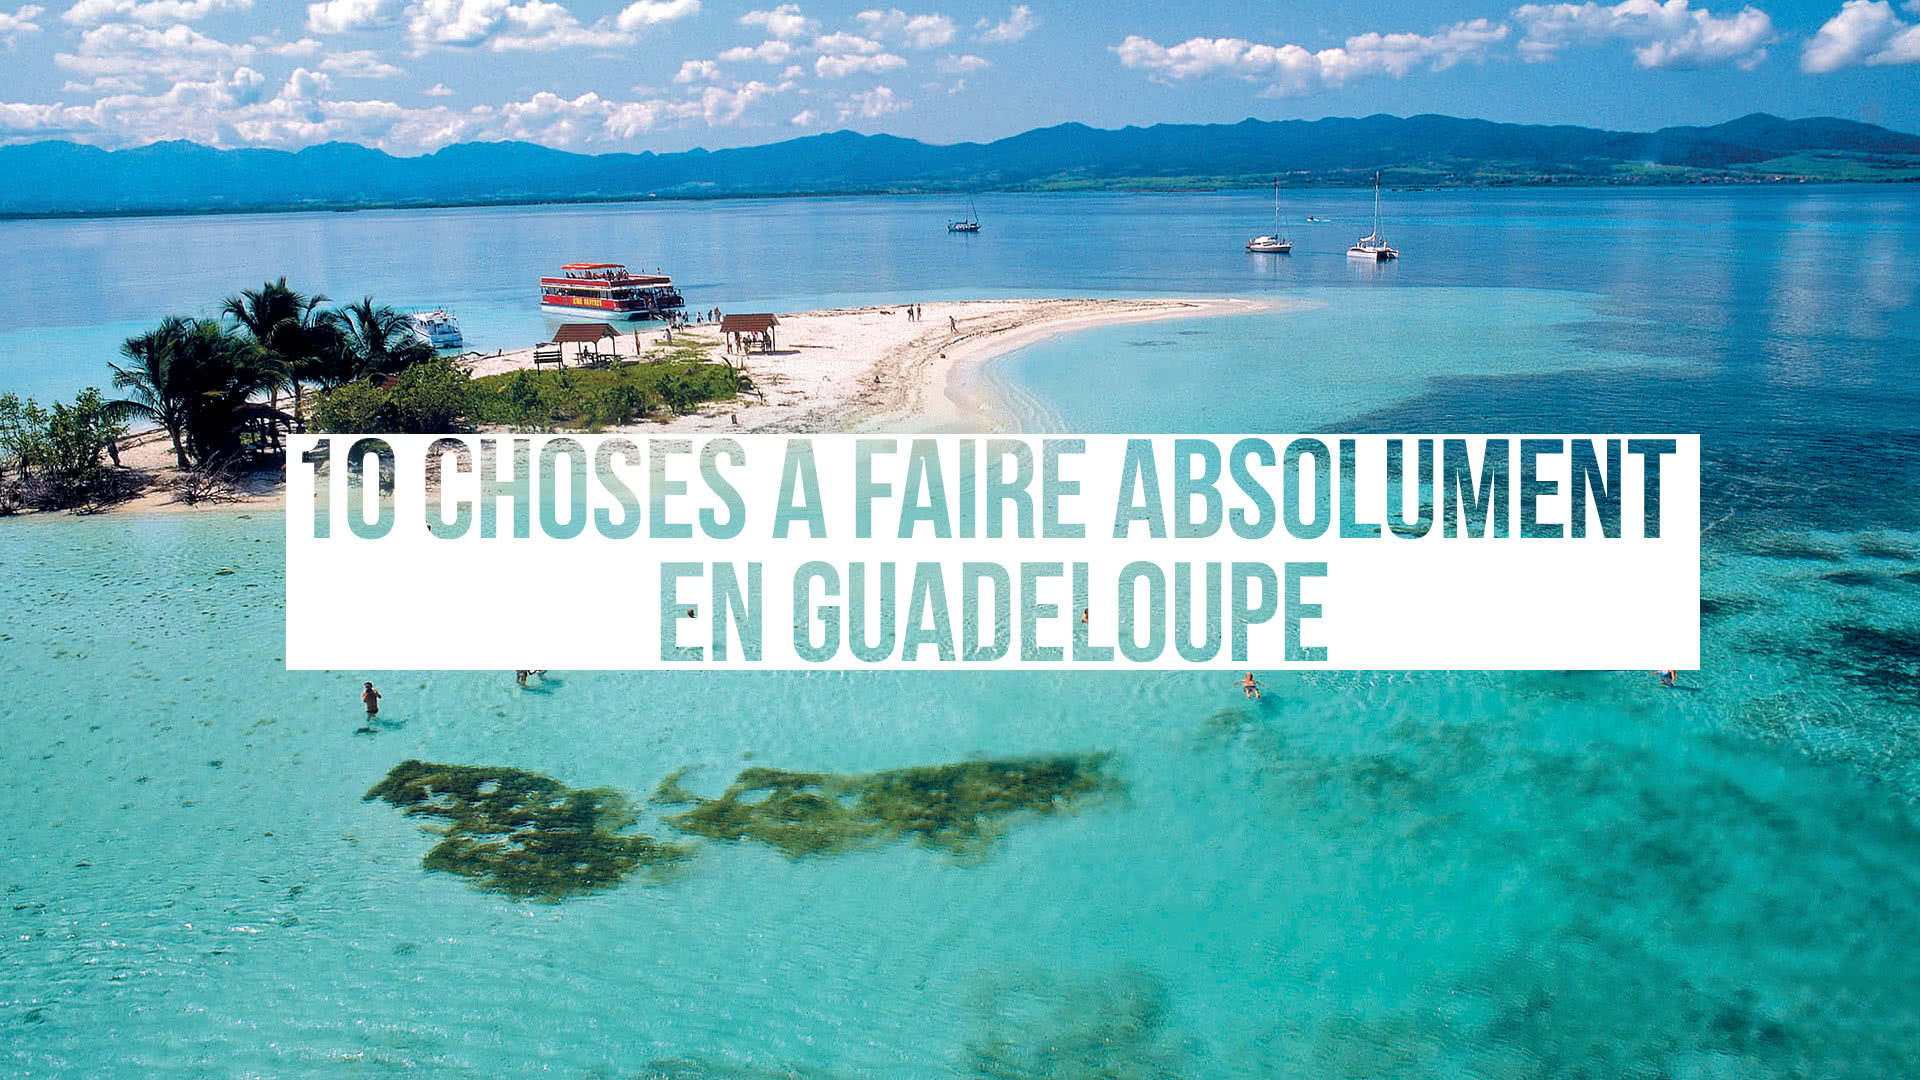 guadeloupe images